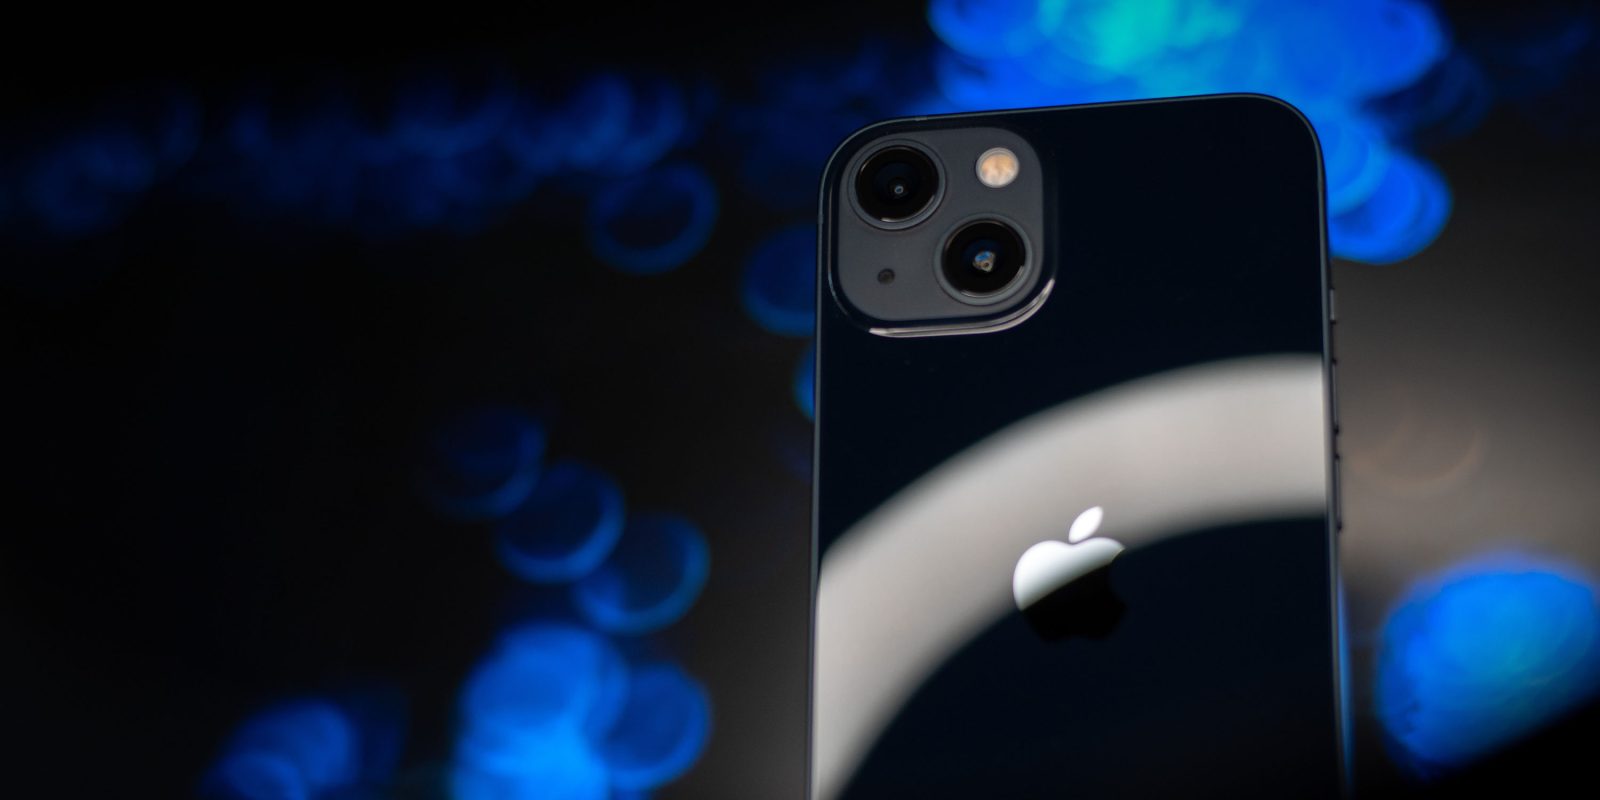 Black iPhone 13 shown against abstract background | Pegasus targeted US iPhones indirectly